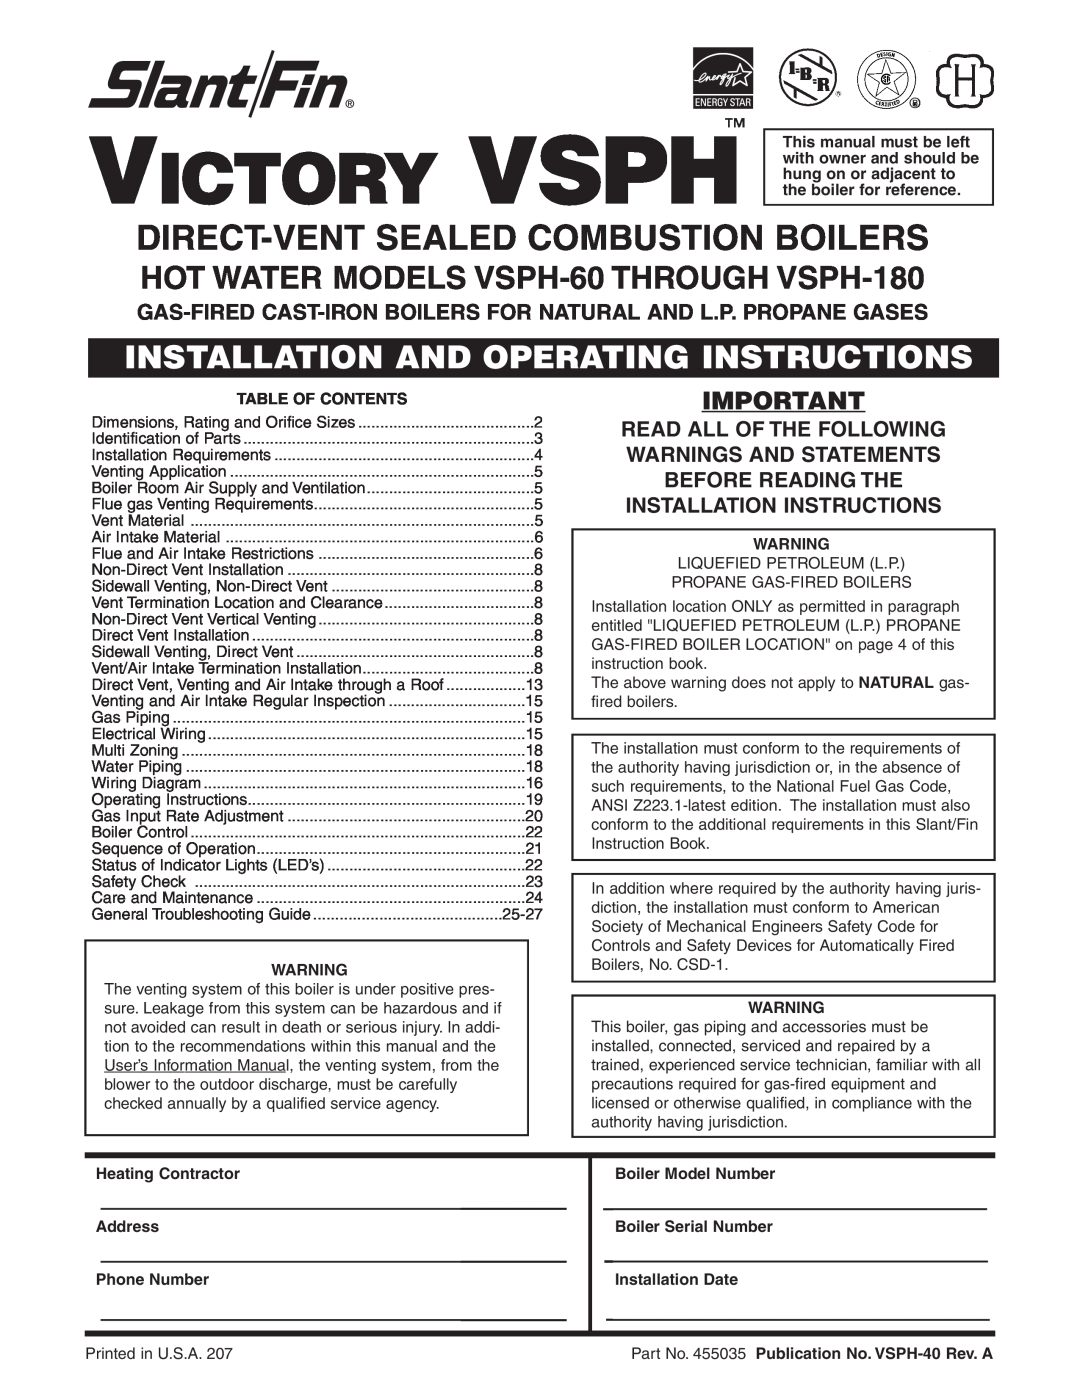 Slant/Fin operating instructions HOT WATER MODELS VSPH-60 THROUGH VSPH-180, Victory Vsph, Table Of Contents, Address 